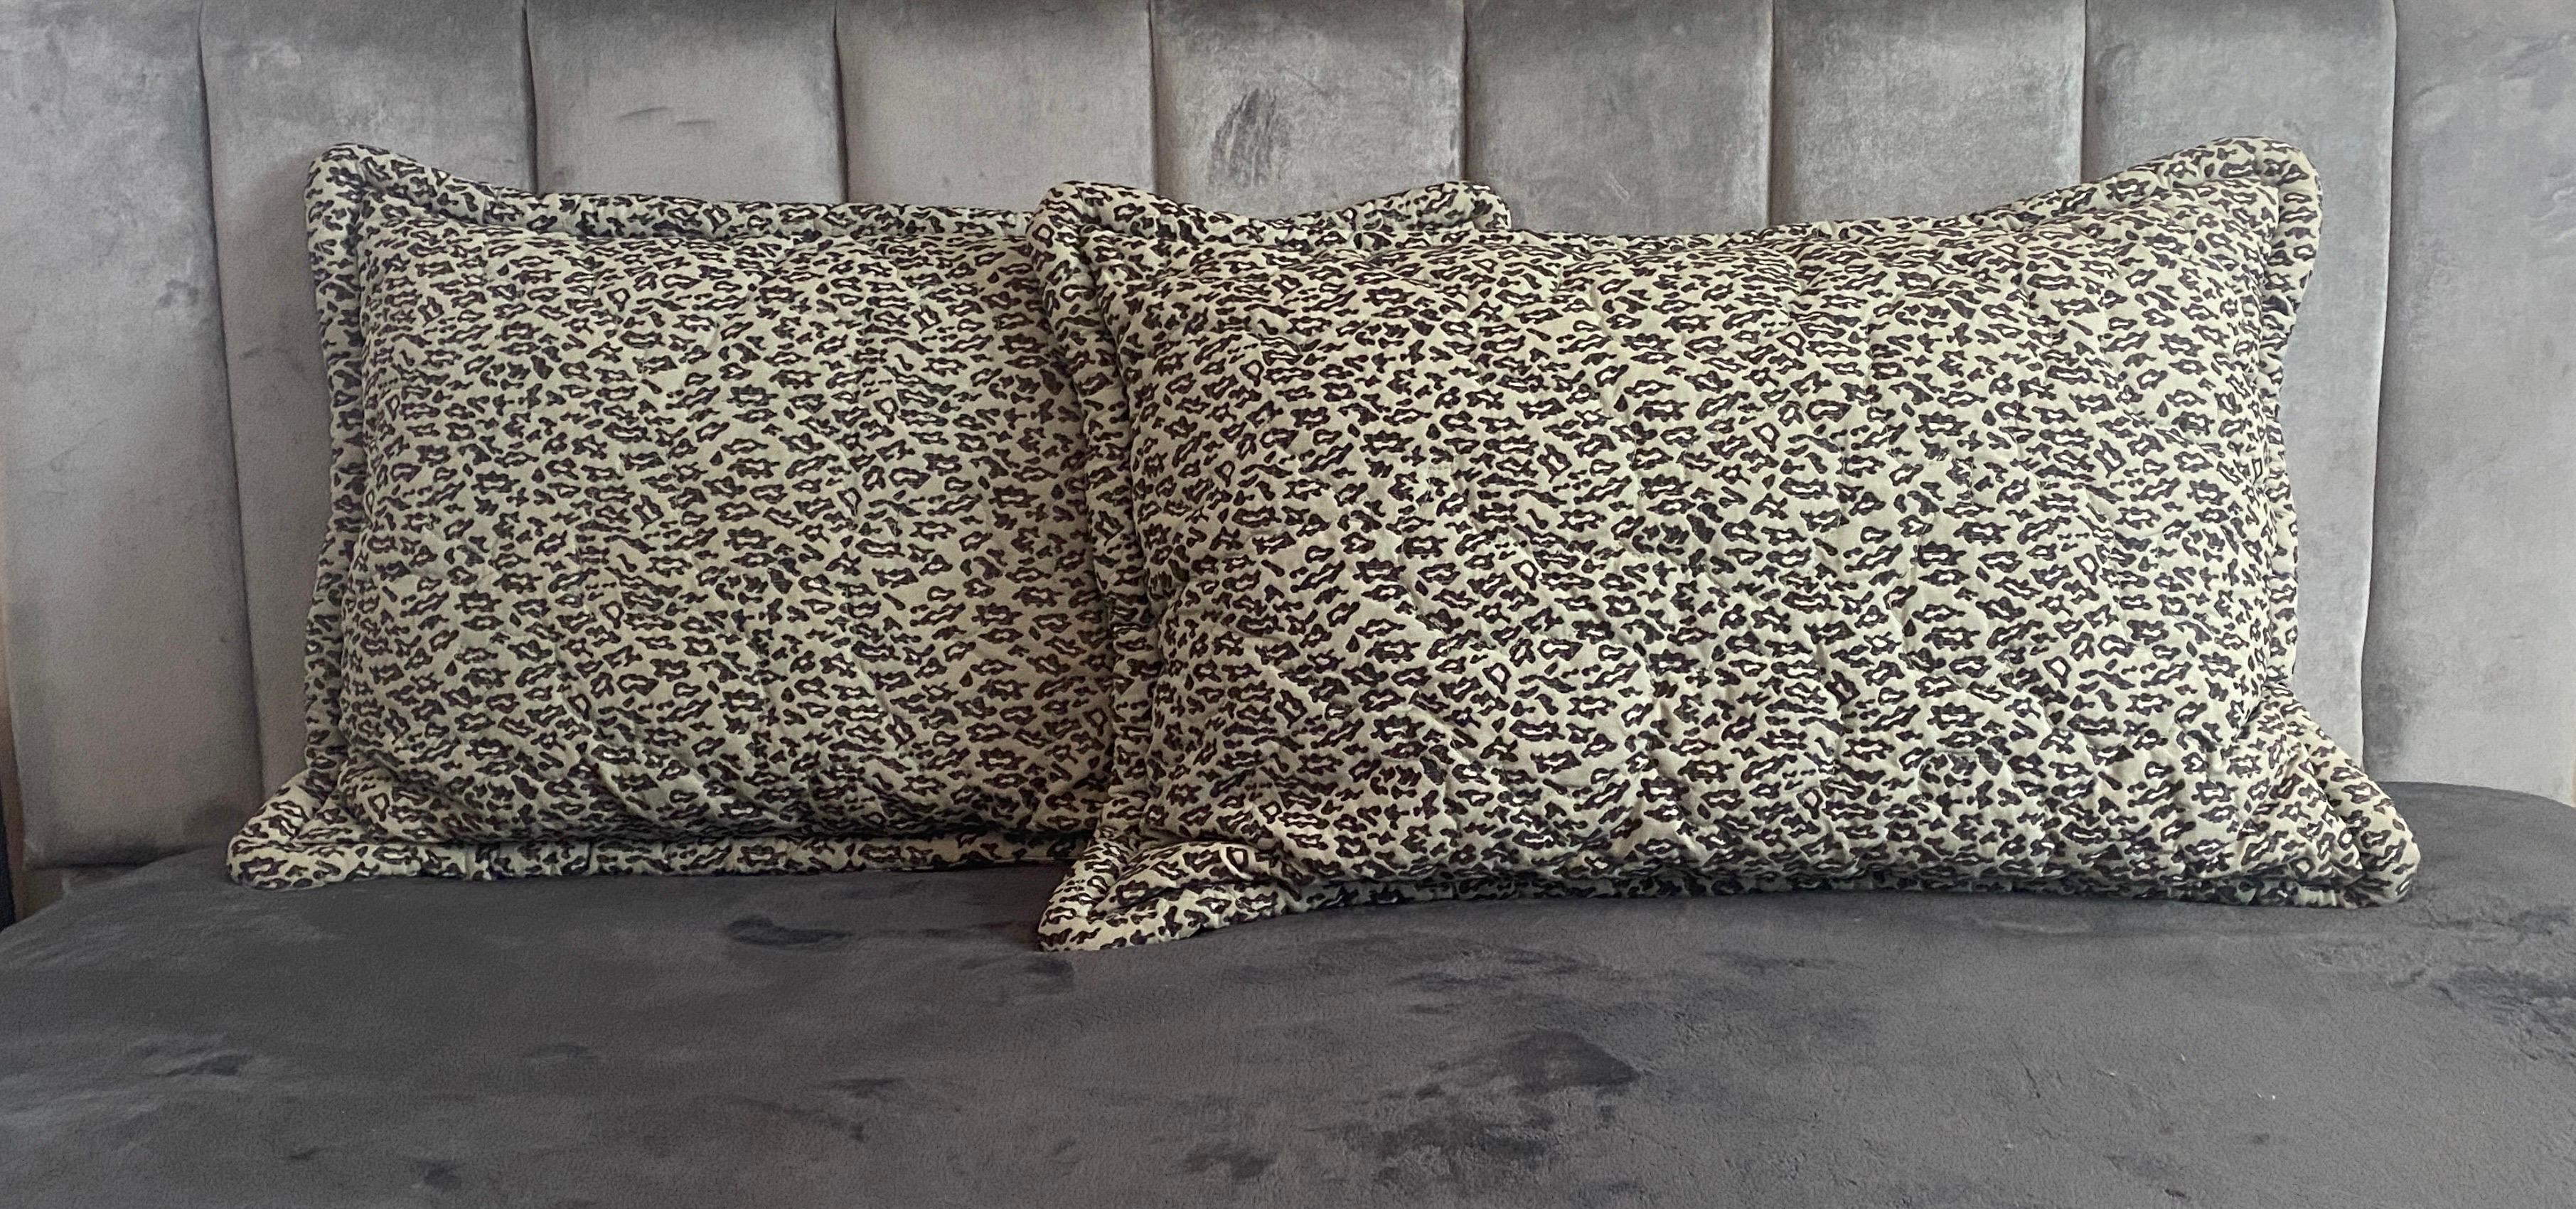 Pair of Rare Jay Spectre Quilted Pillow Shams in Mint & Black/White Leopard  For Sale 1